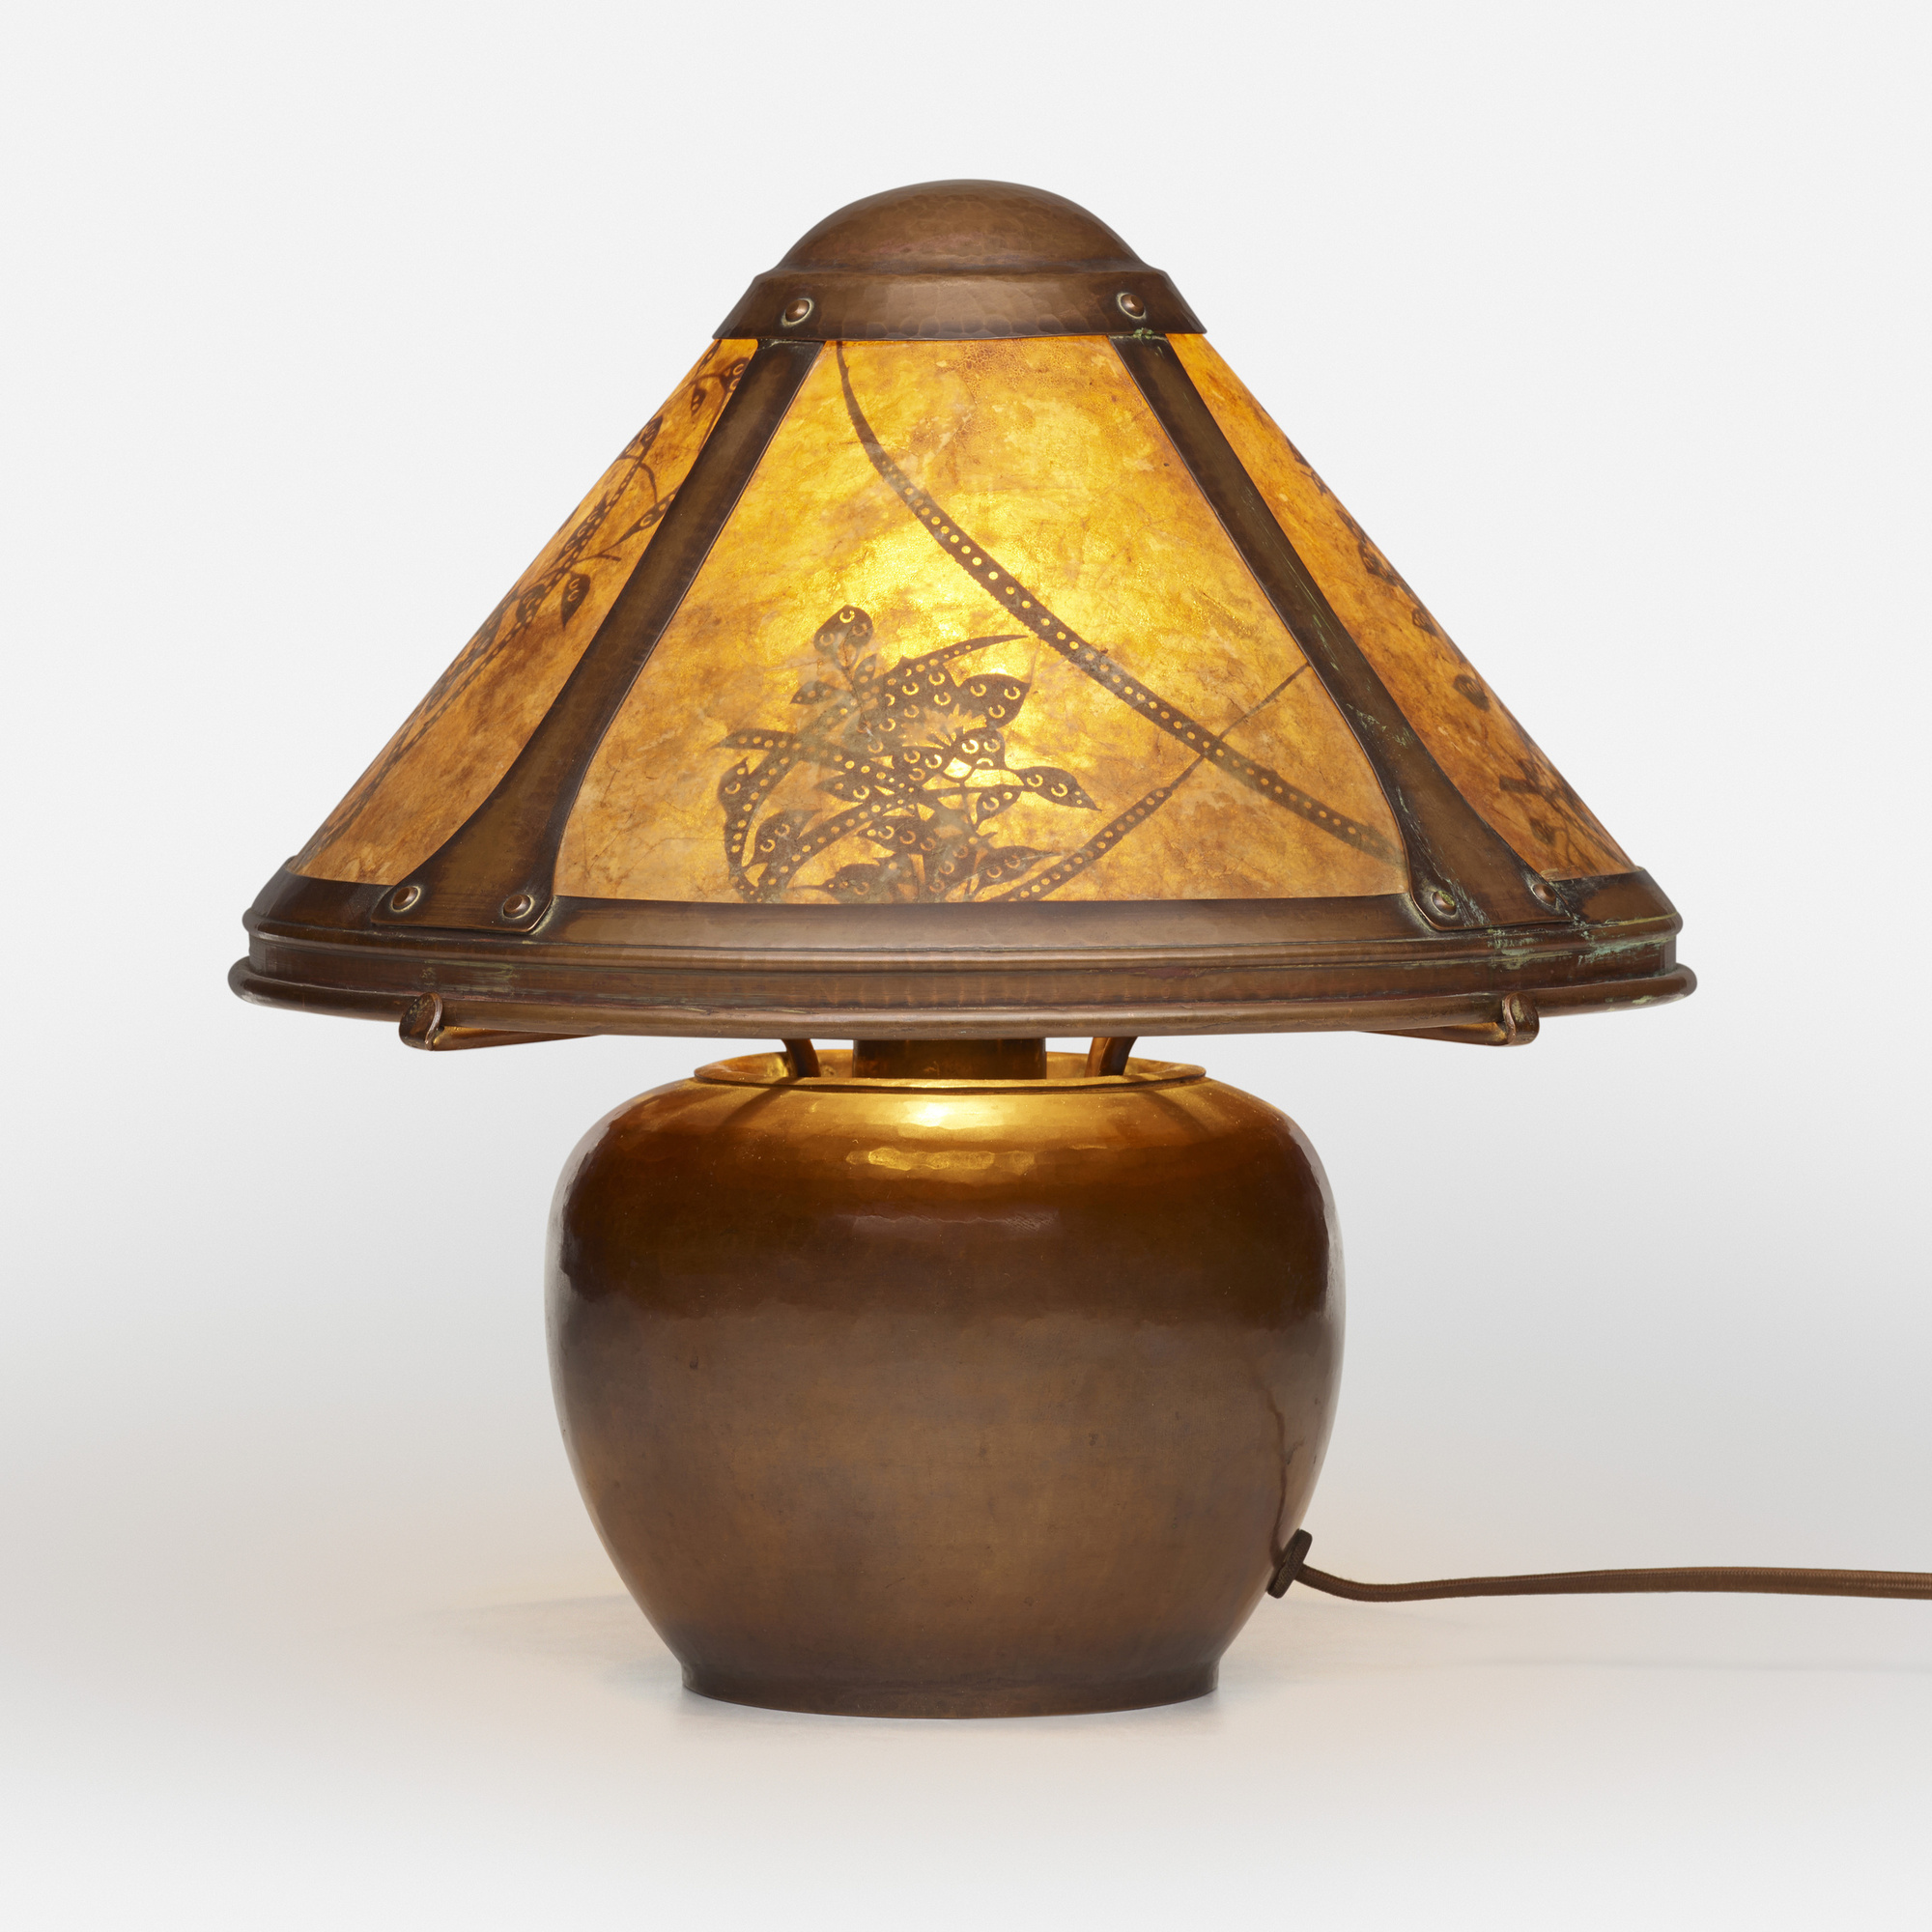 110: DIRK VAN ERP, Rare and Early 'Bean Pot' boudoir lamp < Early 20th Century Design, 2 March 2023 < Auctions | Toomey &amp; Auctioneers